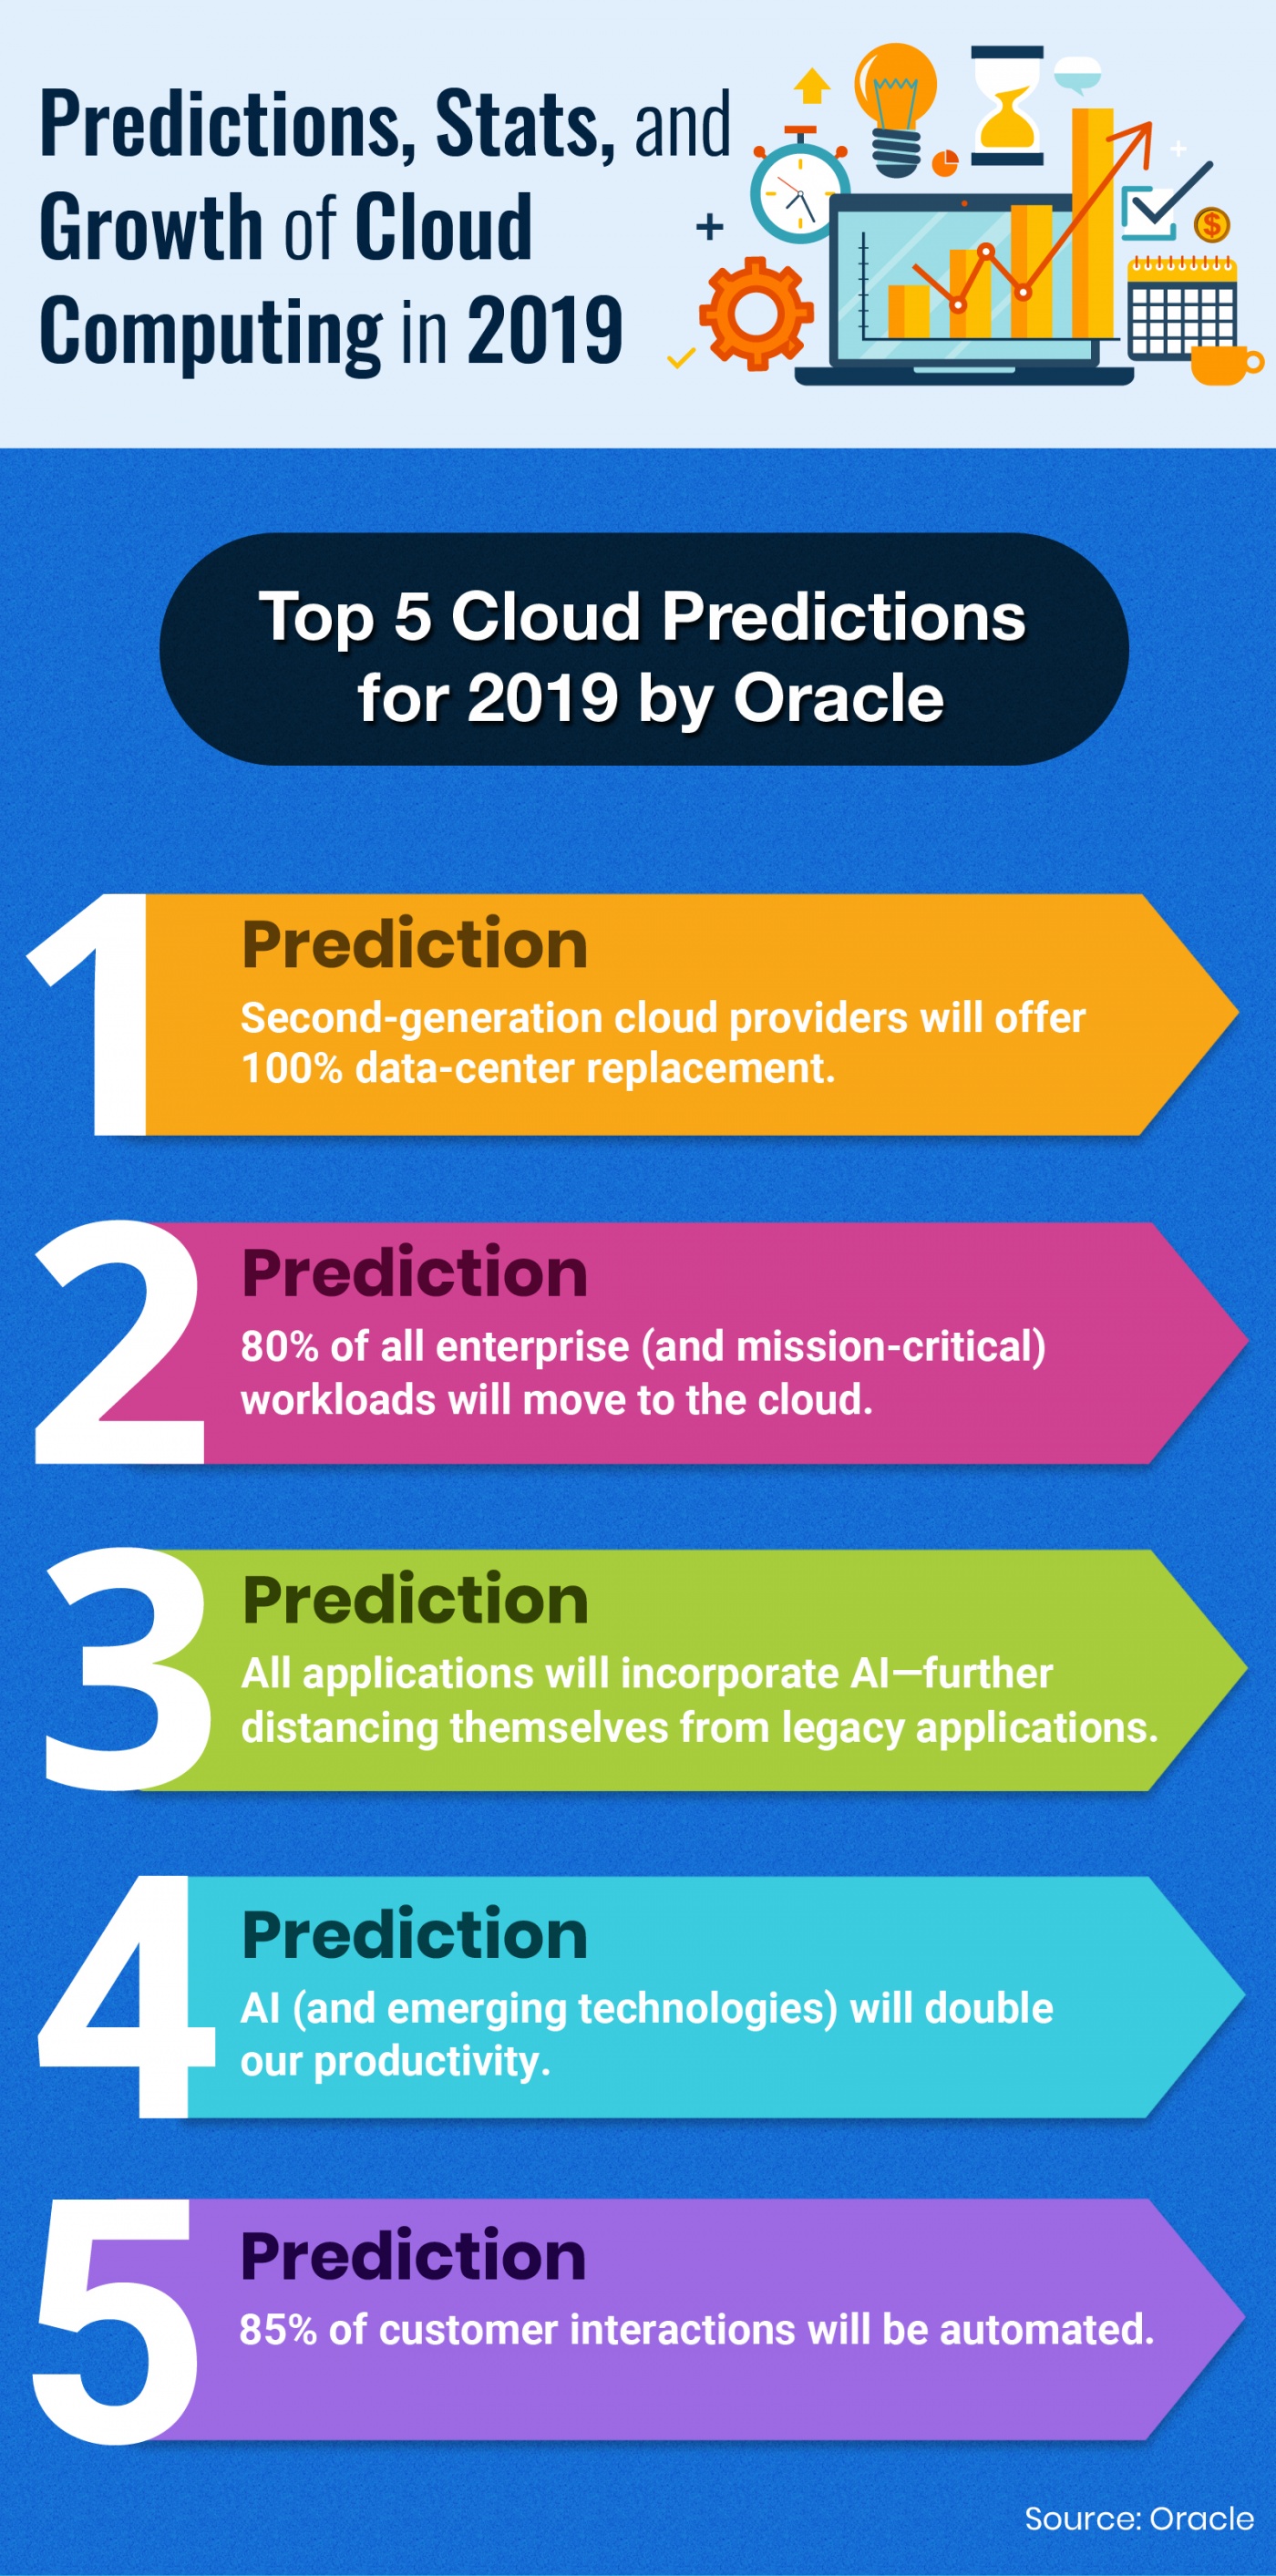 Top 5 Cloud Predictions for 2019 by Oracle